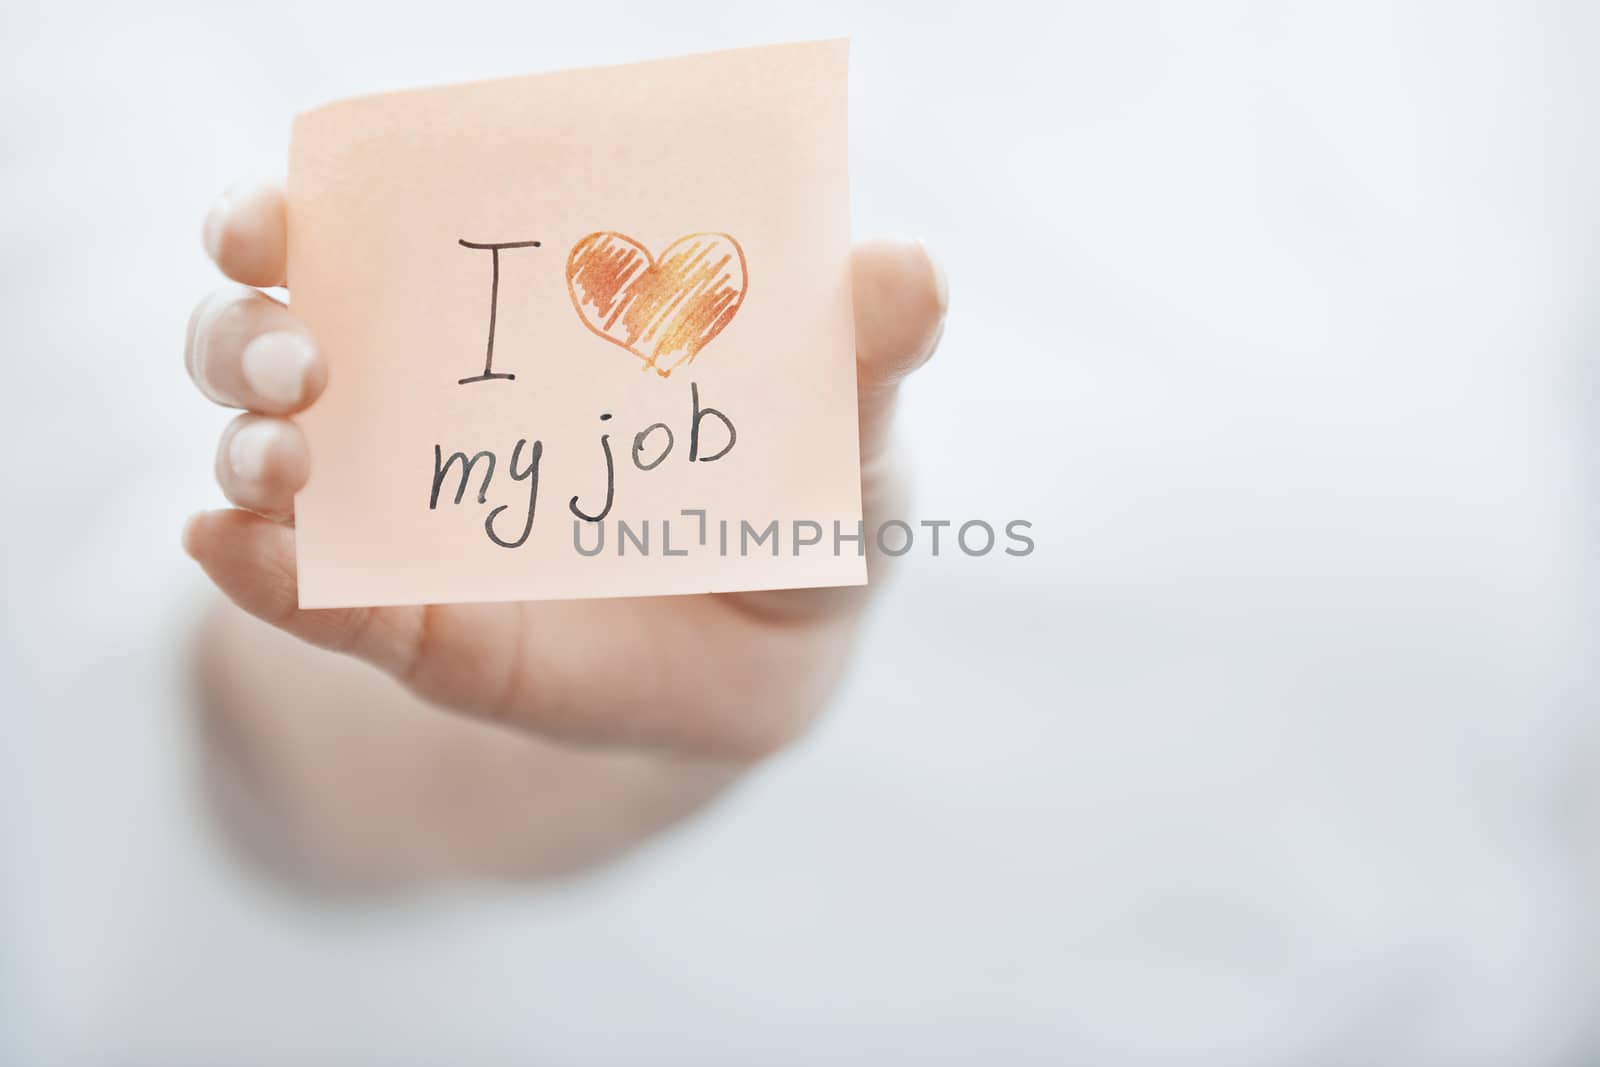 Hand of woman holding adhesive note with text